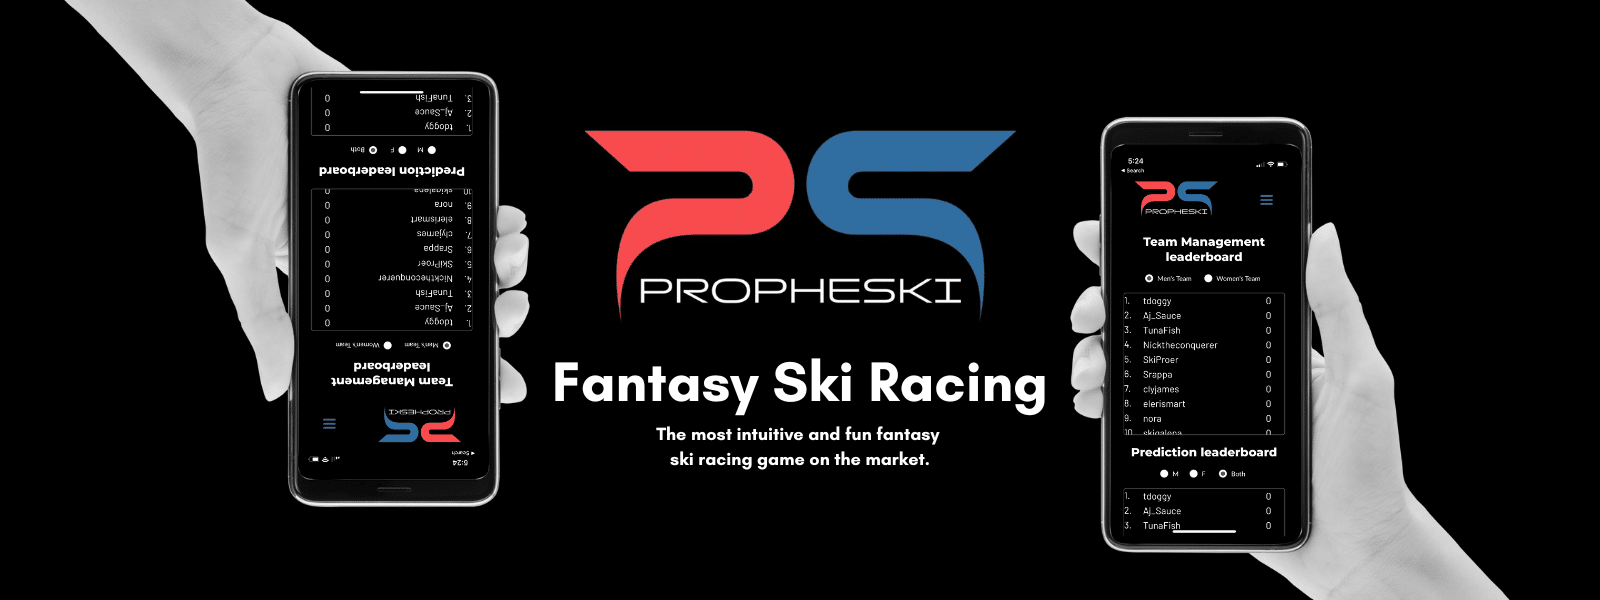 It’s Time to Play! Join Propheski, The Ski Racing Fantasy Sports Game